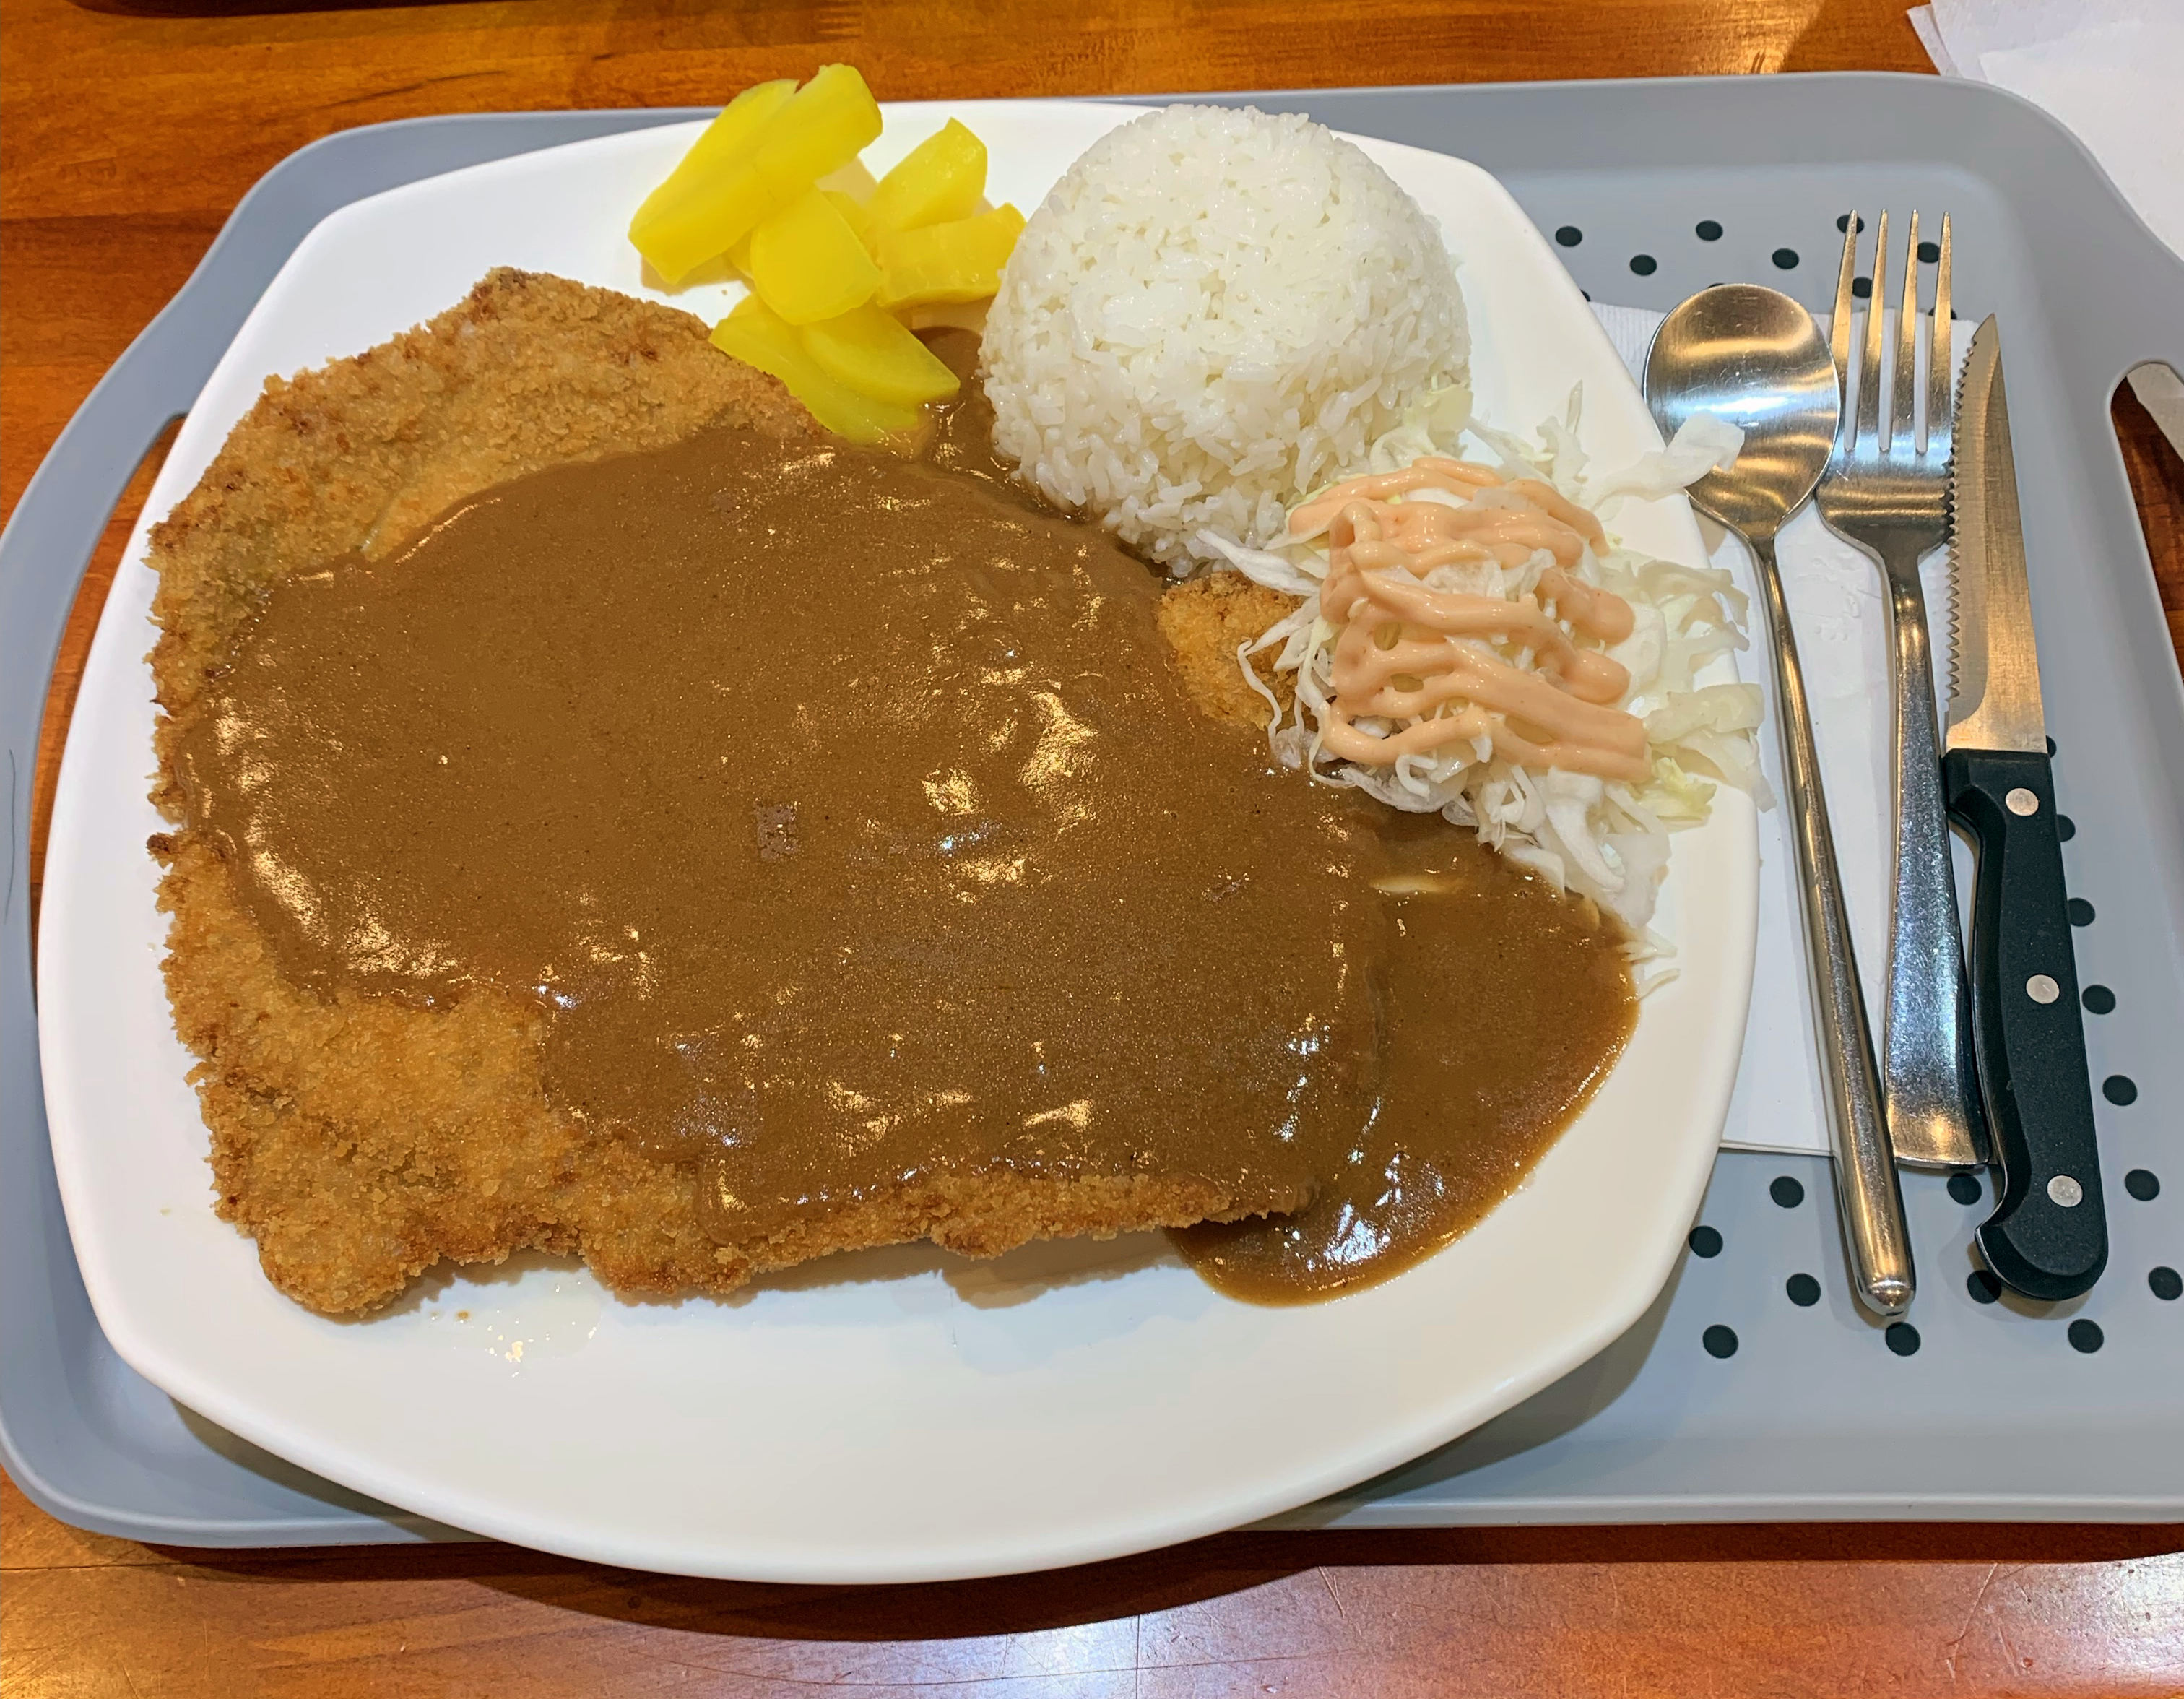 Ton Katsu entree at Bab Plus Restaurant, Urbana. A large pork cutlet covered in a brown gravy is served on a large white plate with rice and a cabbage salad. The plate is on a cafeteria tray. Photo by Jessica Hammie. 